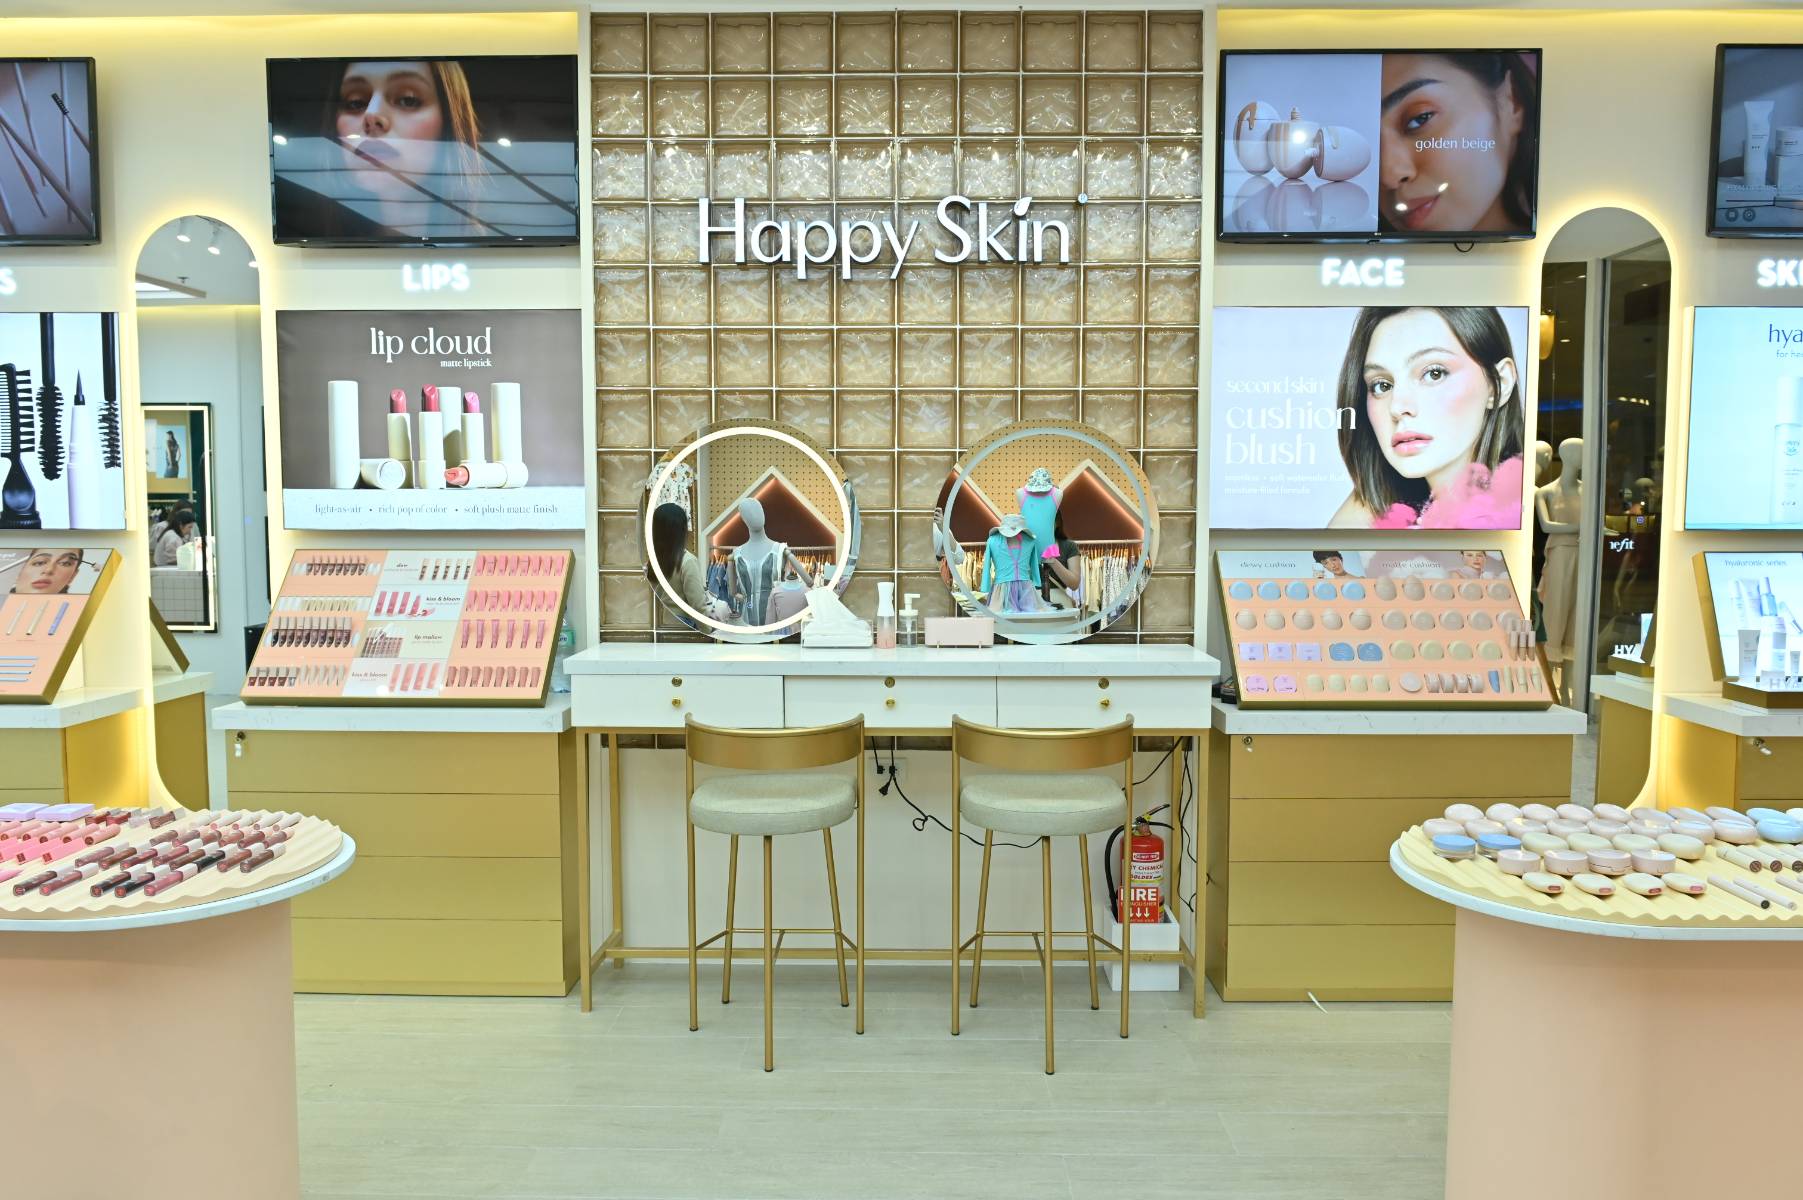 Happy Skin at Maisonette in Power Plant Mall, Rockwell, Makati.